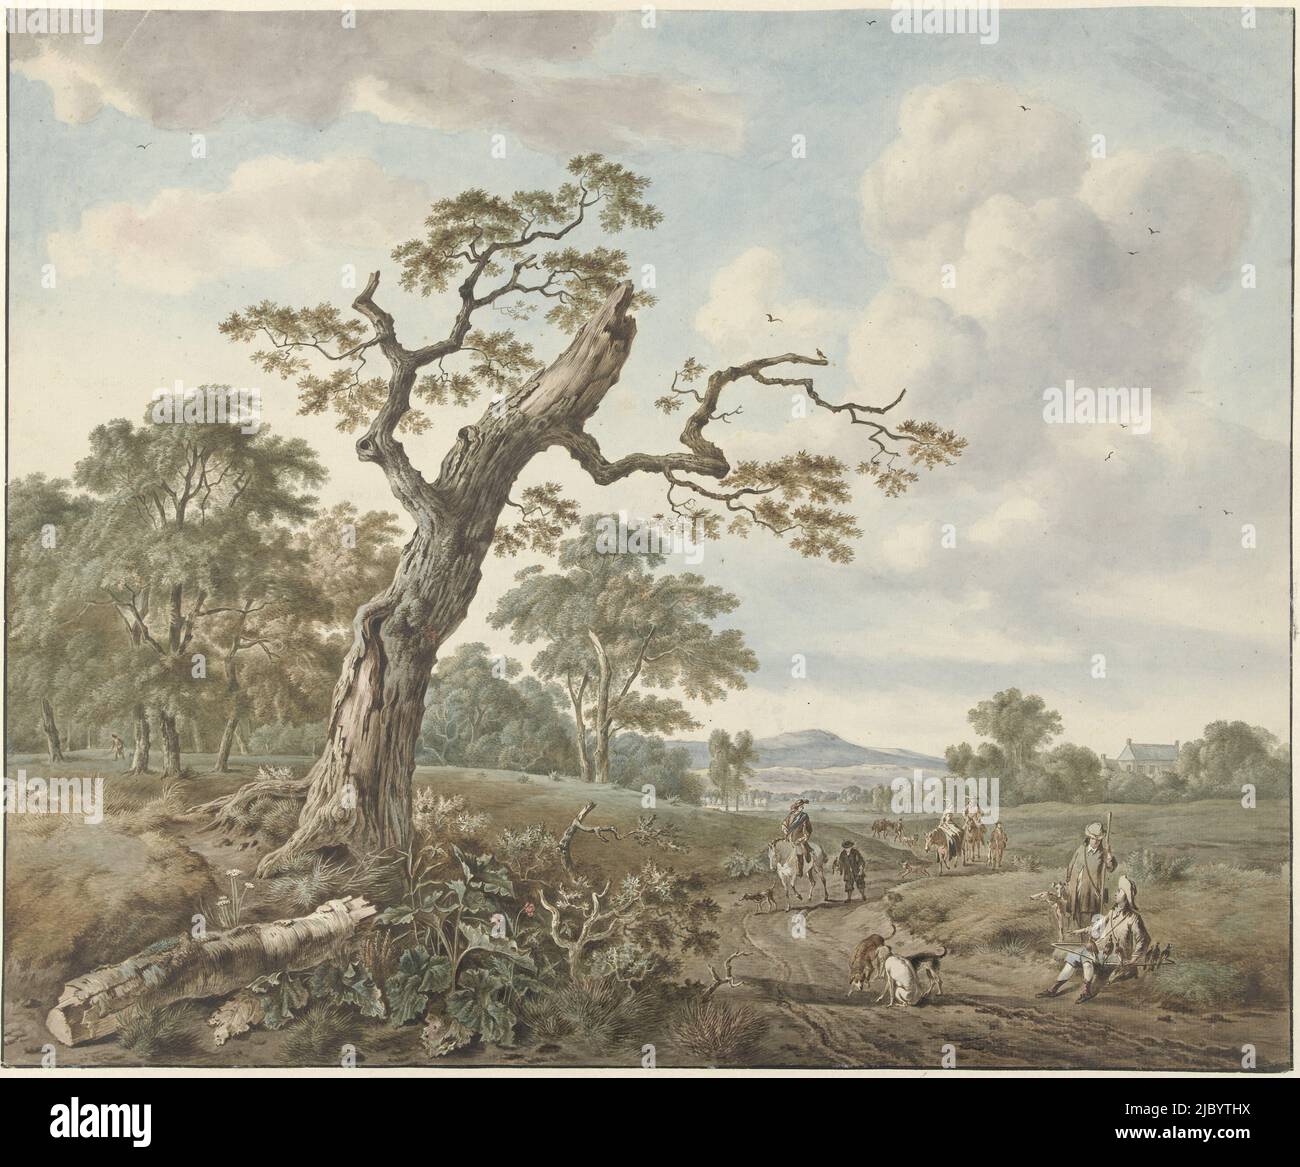 Landscape with hunting party on a country road, Gerard van Nijmegen, after Jan Wijnants, after Johannes Lingelbach, 1786, draughtsman: Gerard van Nijmegen, after: Jan Wijnants, after: Johannes Lingelbach, 1786, paper, brush, pen, h 457 mm × w 554 mm Stock Photo